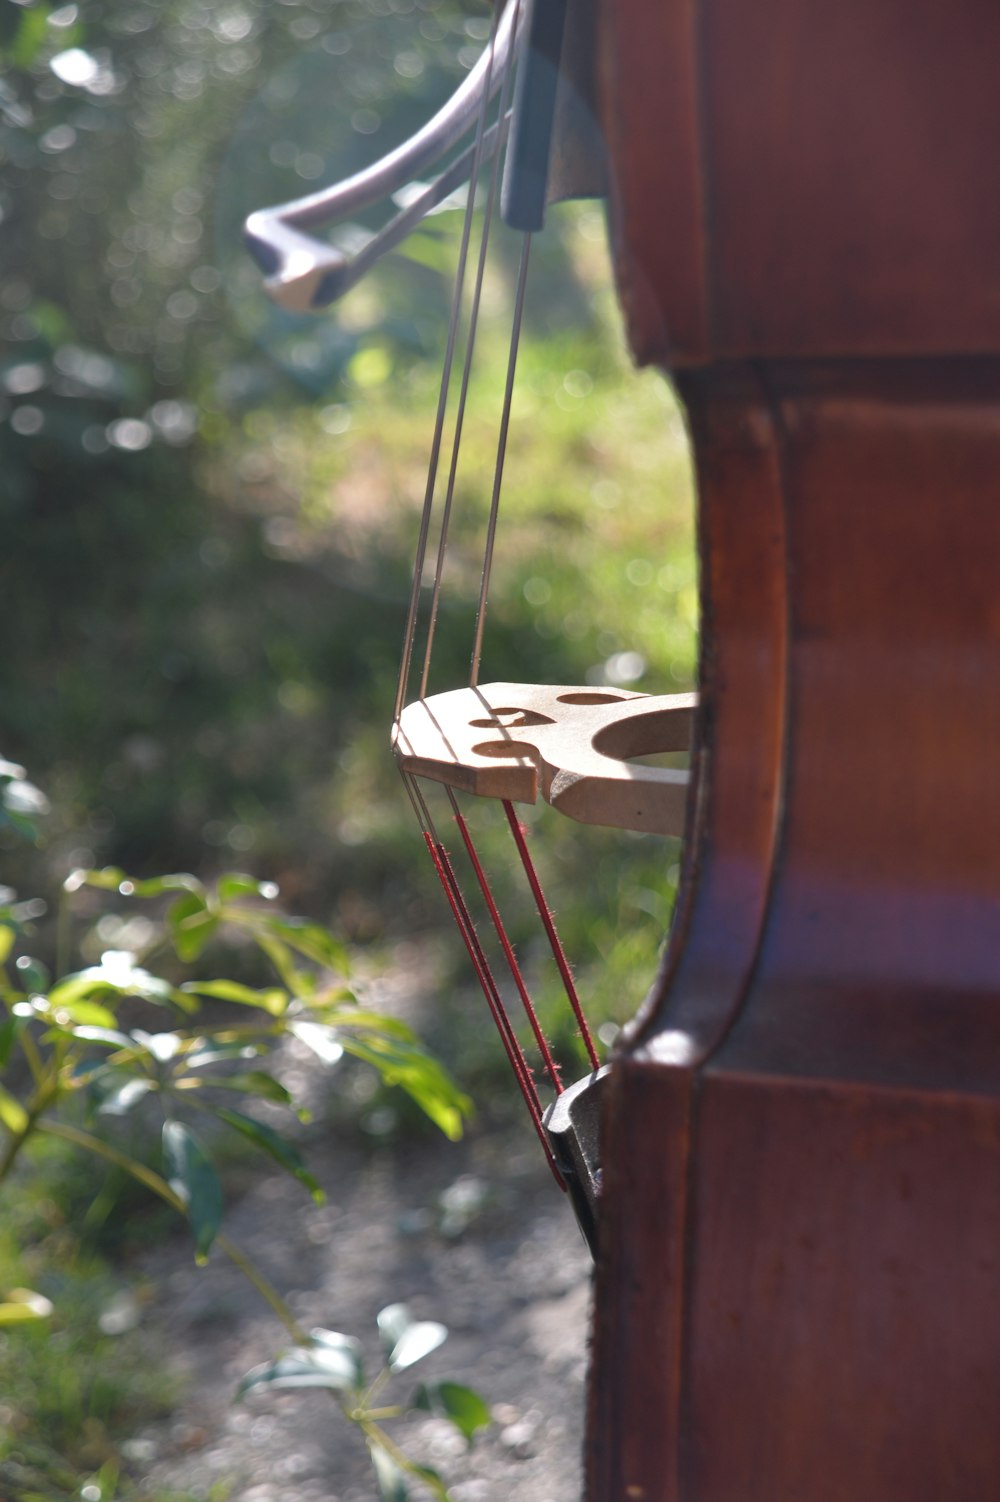 a close up of a musical instrument with strings attached to it